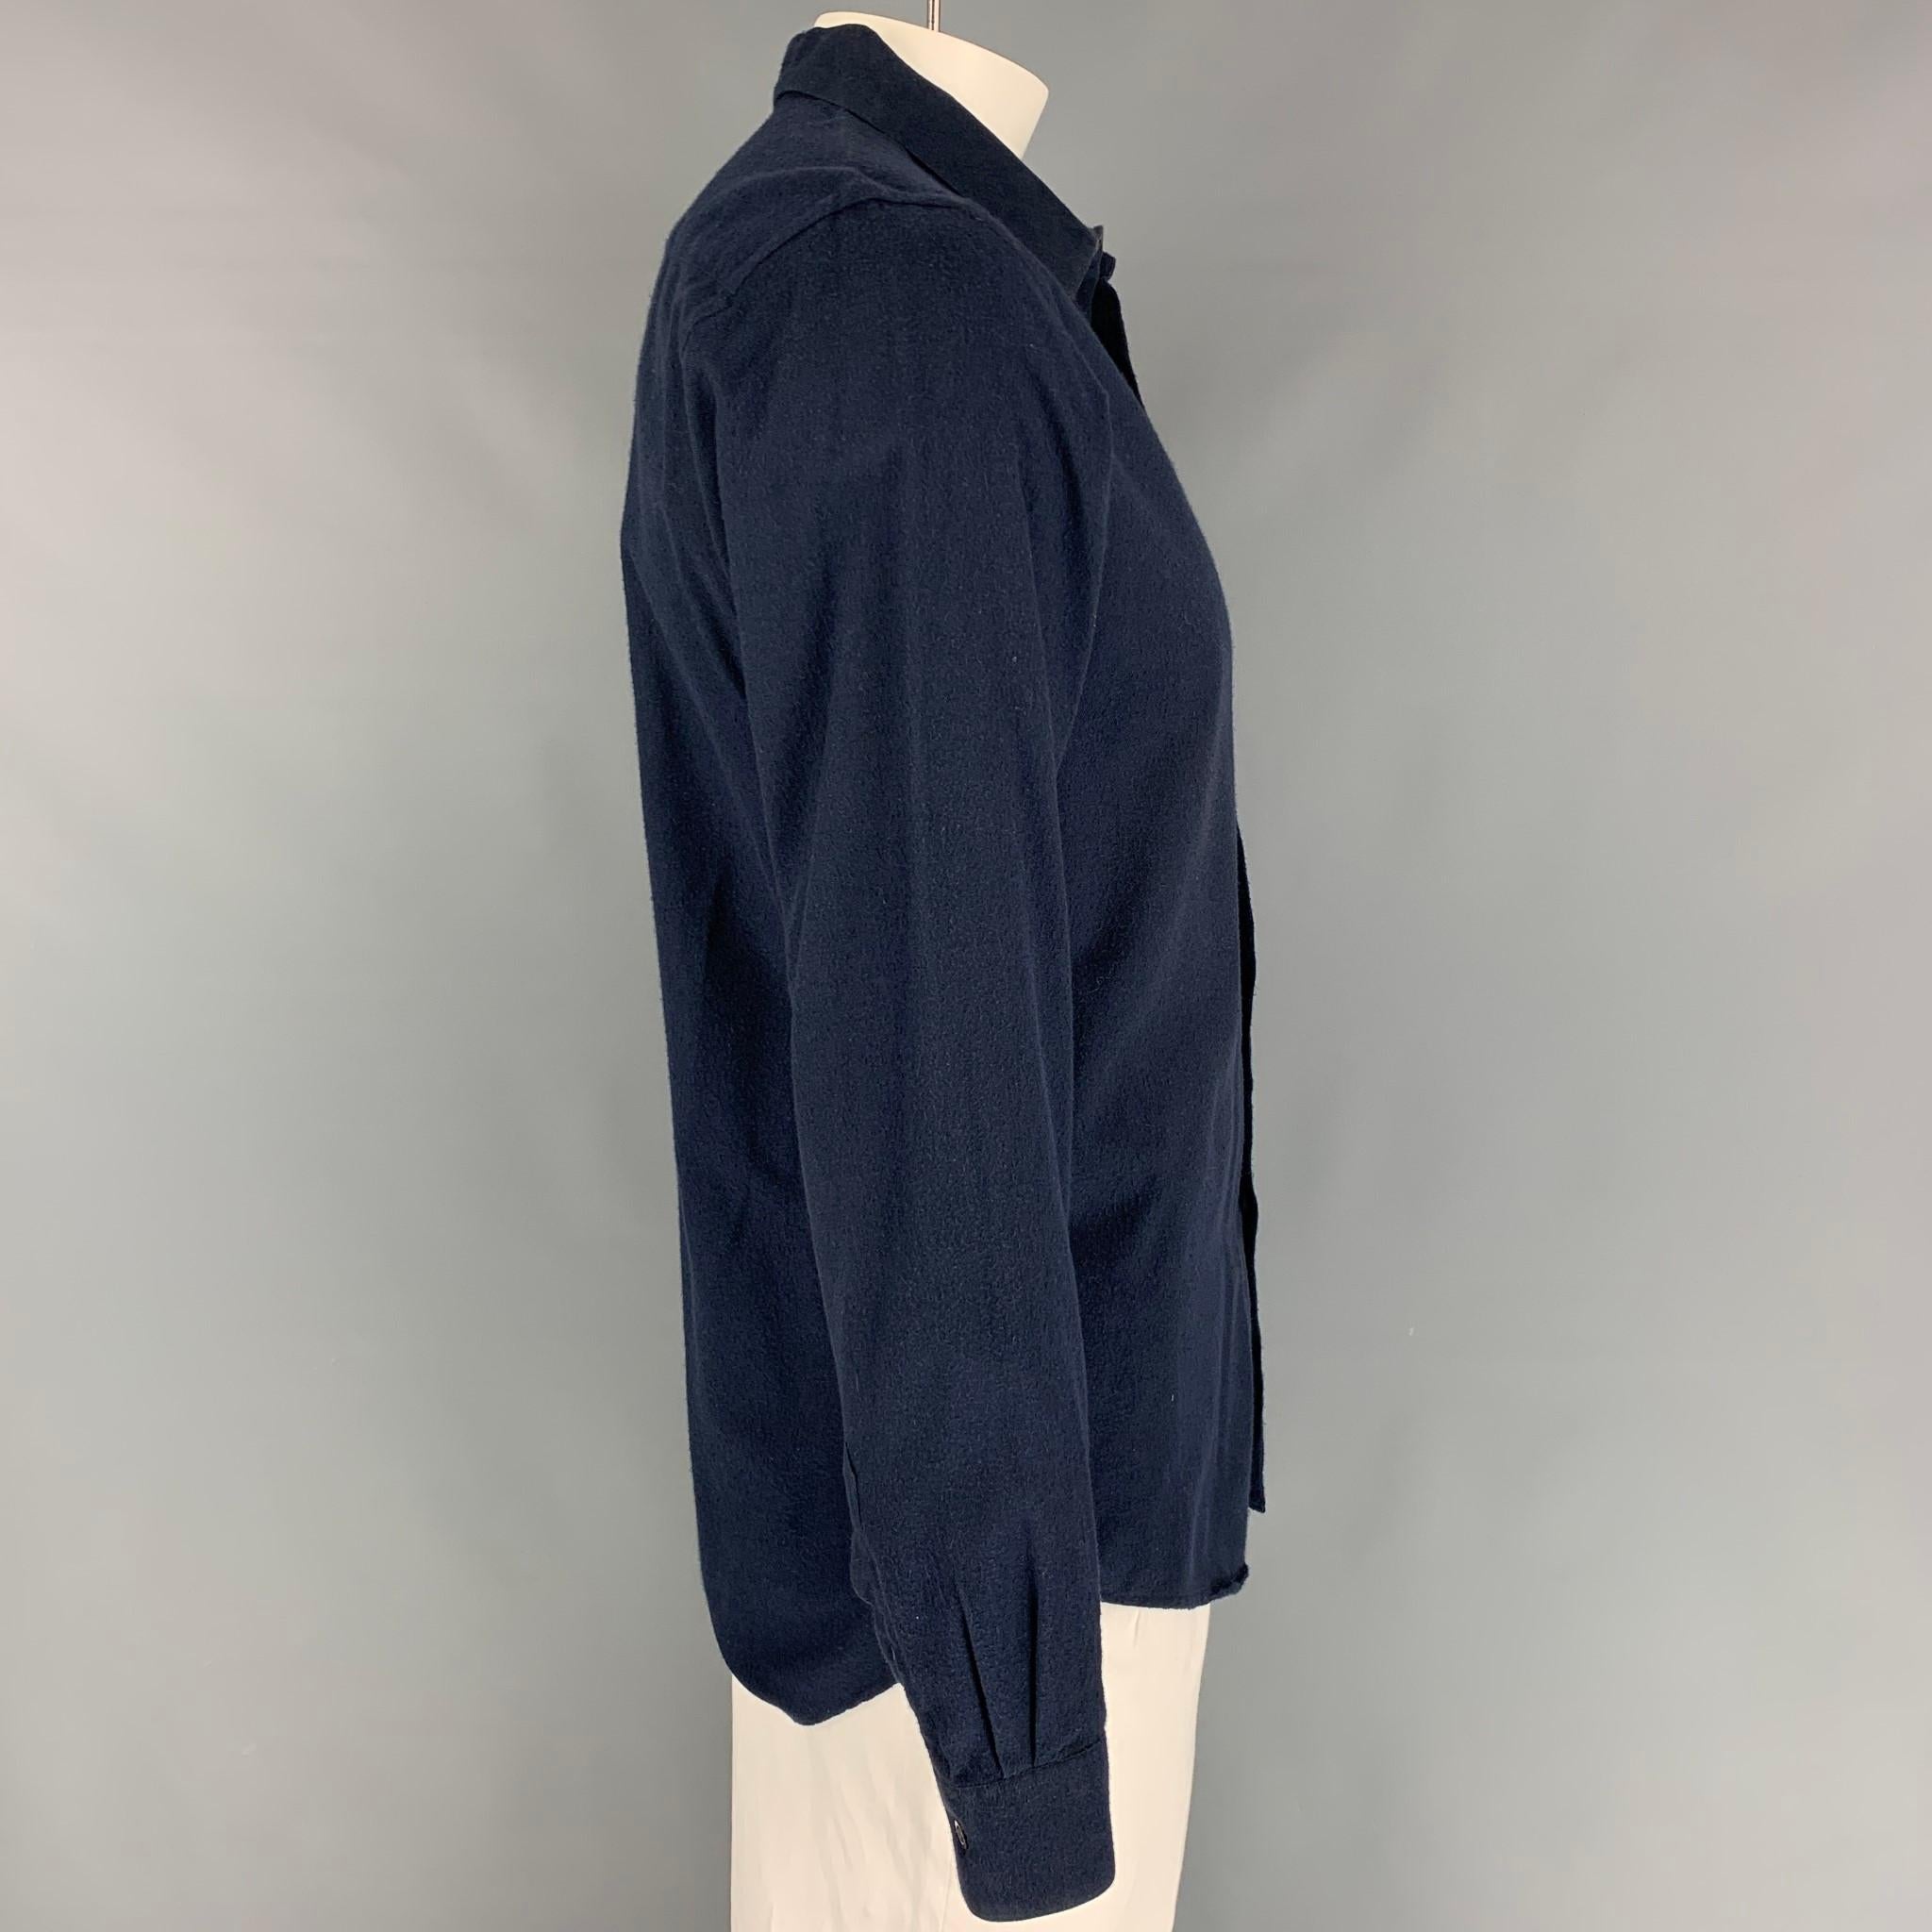 PATRIK ERVELL long sleeve shirt comes in a navy cotton featuring a spread collar, patch pocket, and a buttoned closure. 

Very Good Pre-Owned Condition.
Marked: XL

Measurements:

Shoulder: 18.5 in.
Chest: 42 in.
Sleeve: 26.5 in.
Length: 30.5 in. 